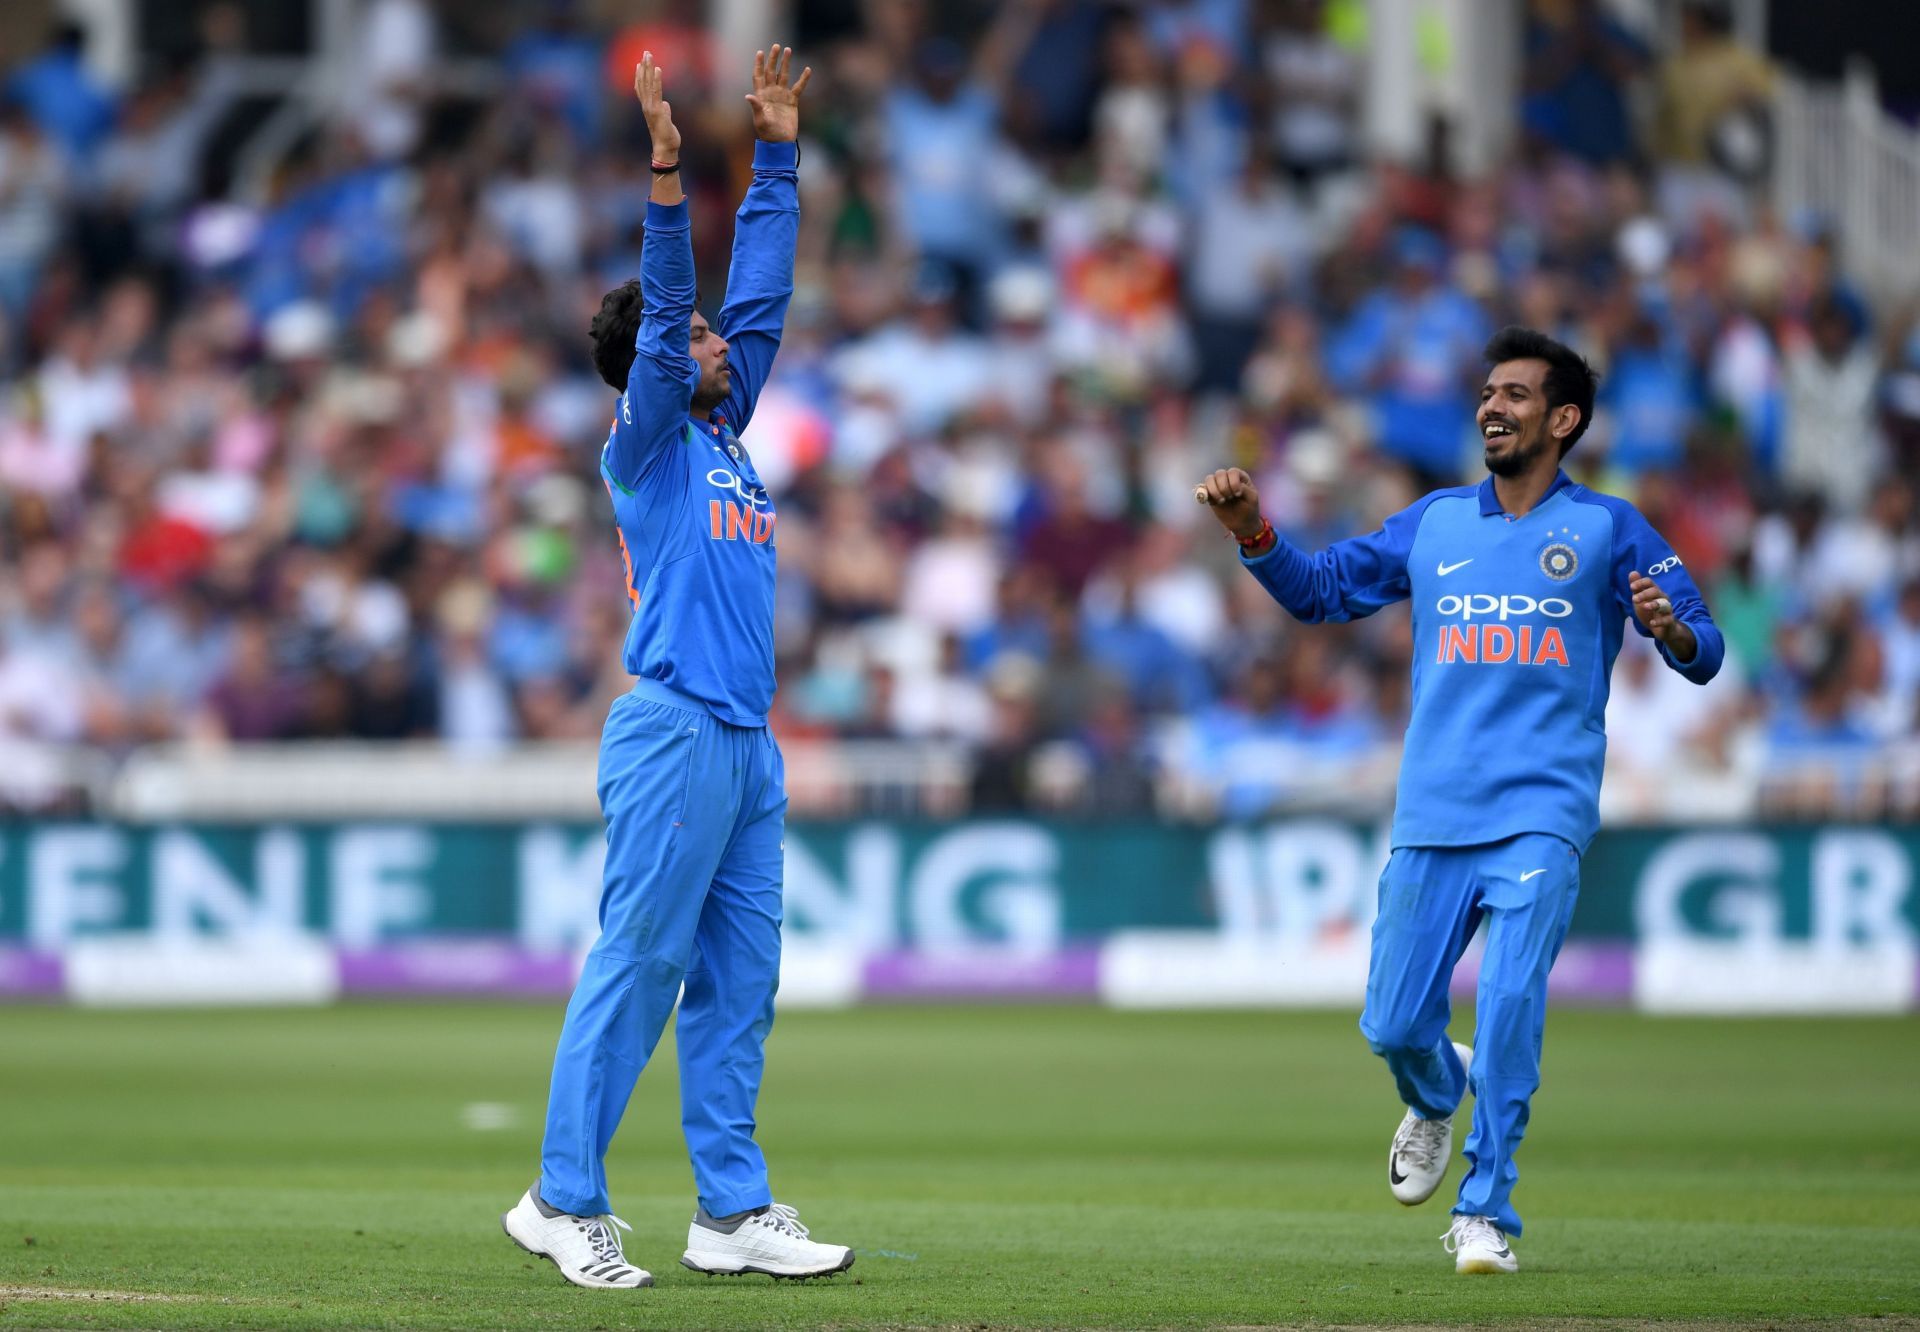 Kuldeep Yadav and Yuzvendra Chahal might be seen playing in tandem in the T20Is against the West Indies.